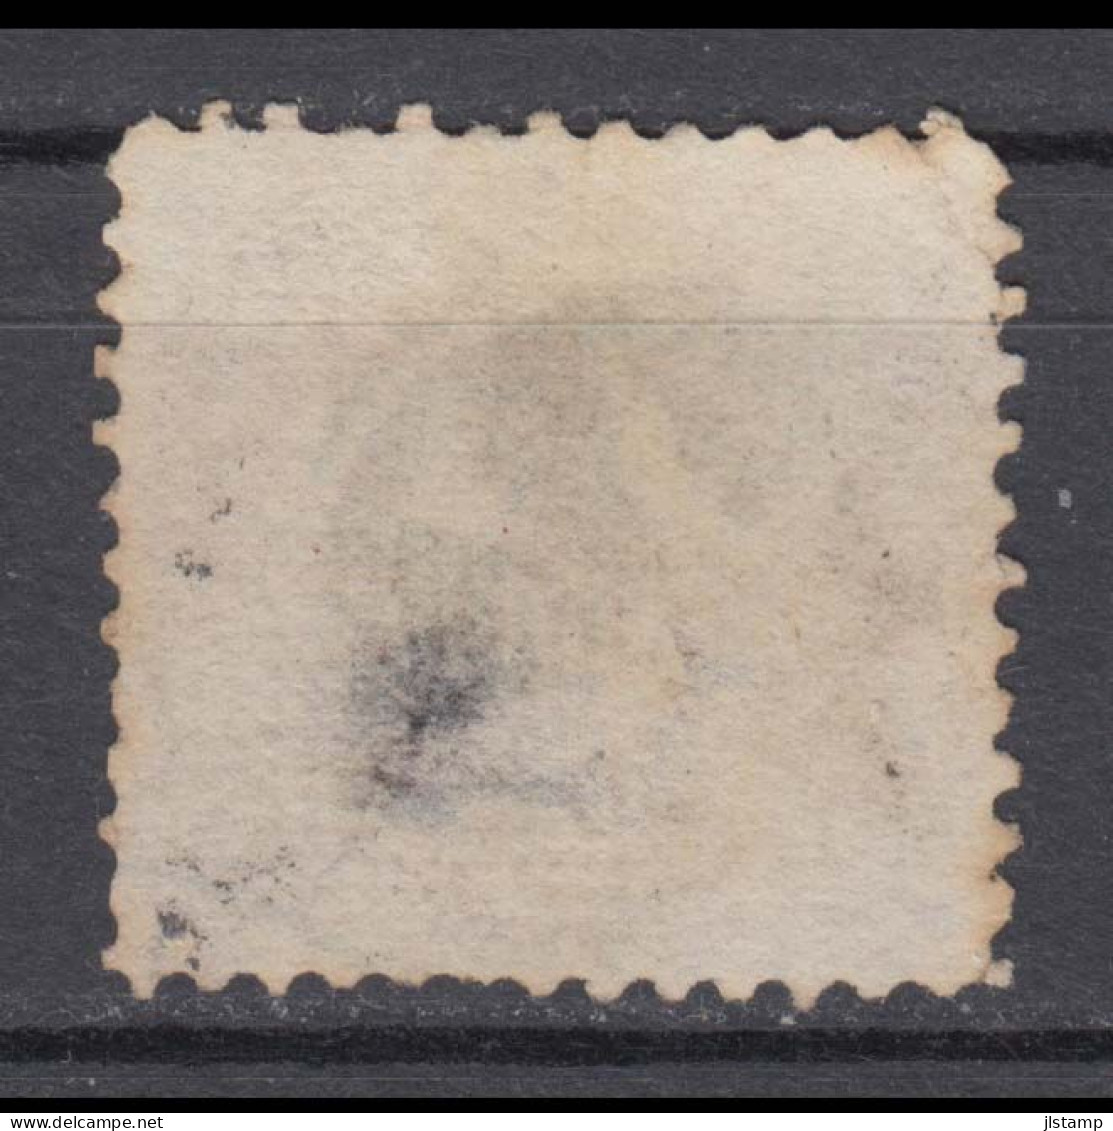 US 1869 Post Horse And Rider 2c,Grill,fine Used Stamp ,Scott#113,VF, $85 - Used Stamps